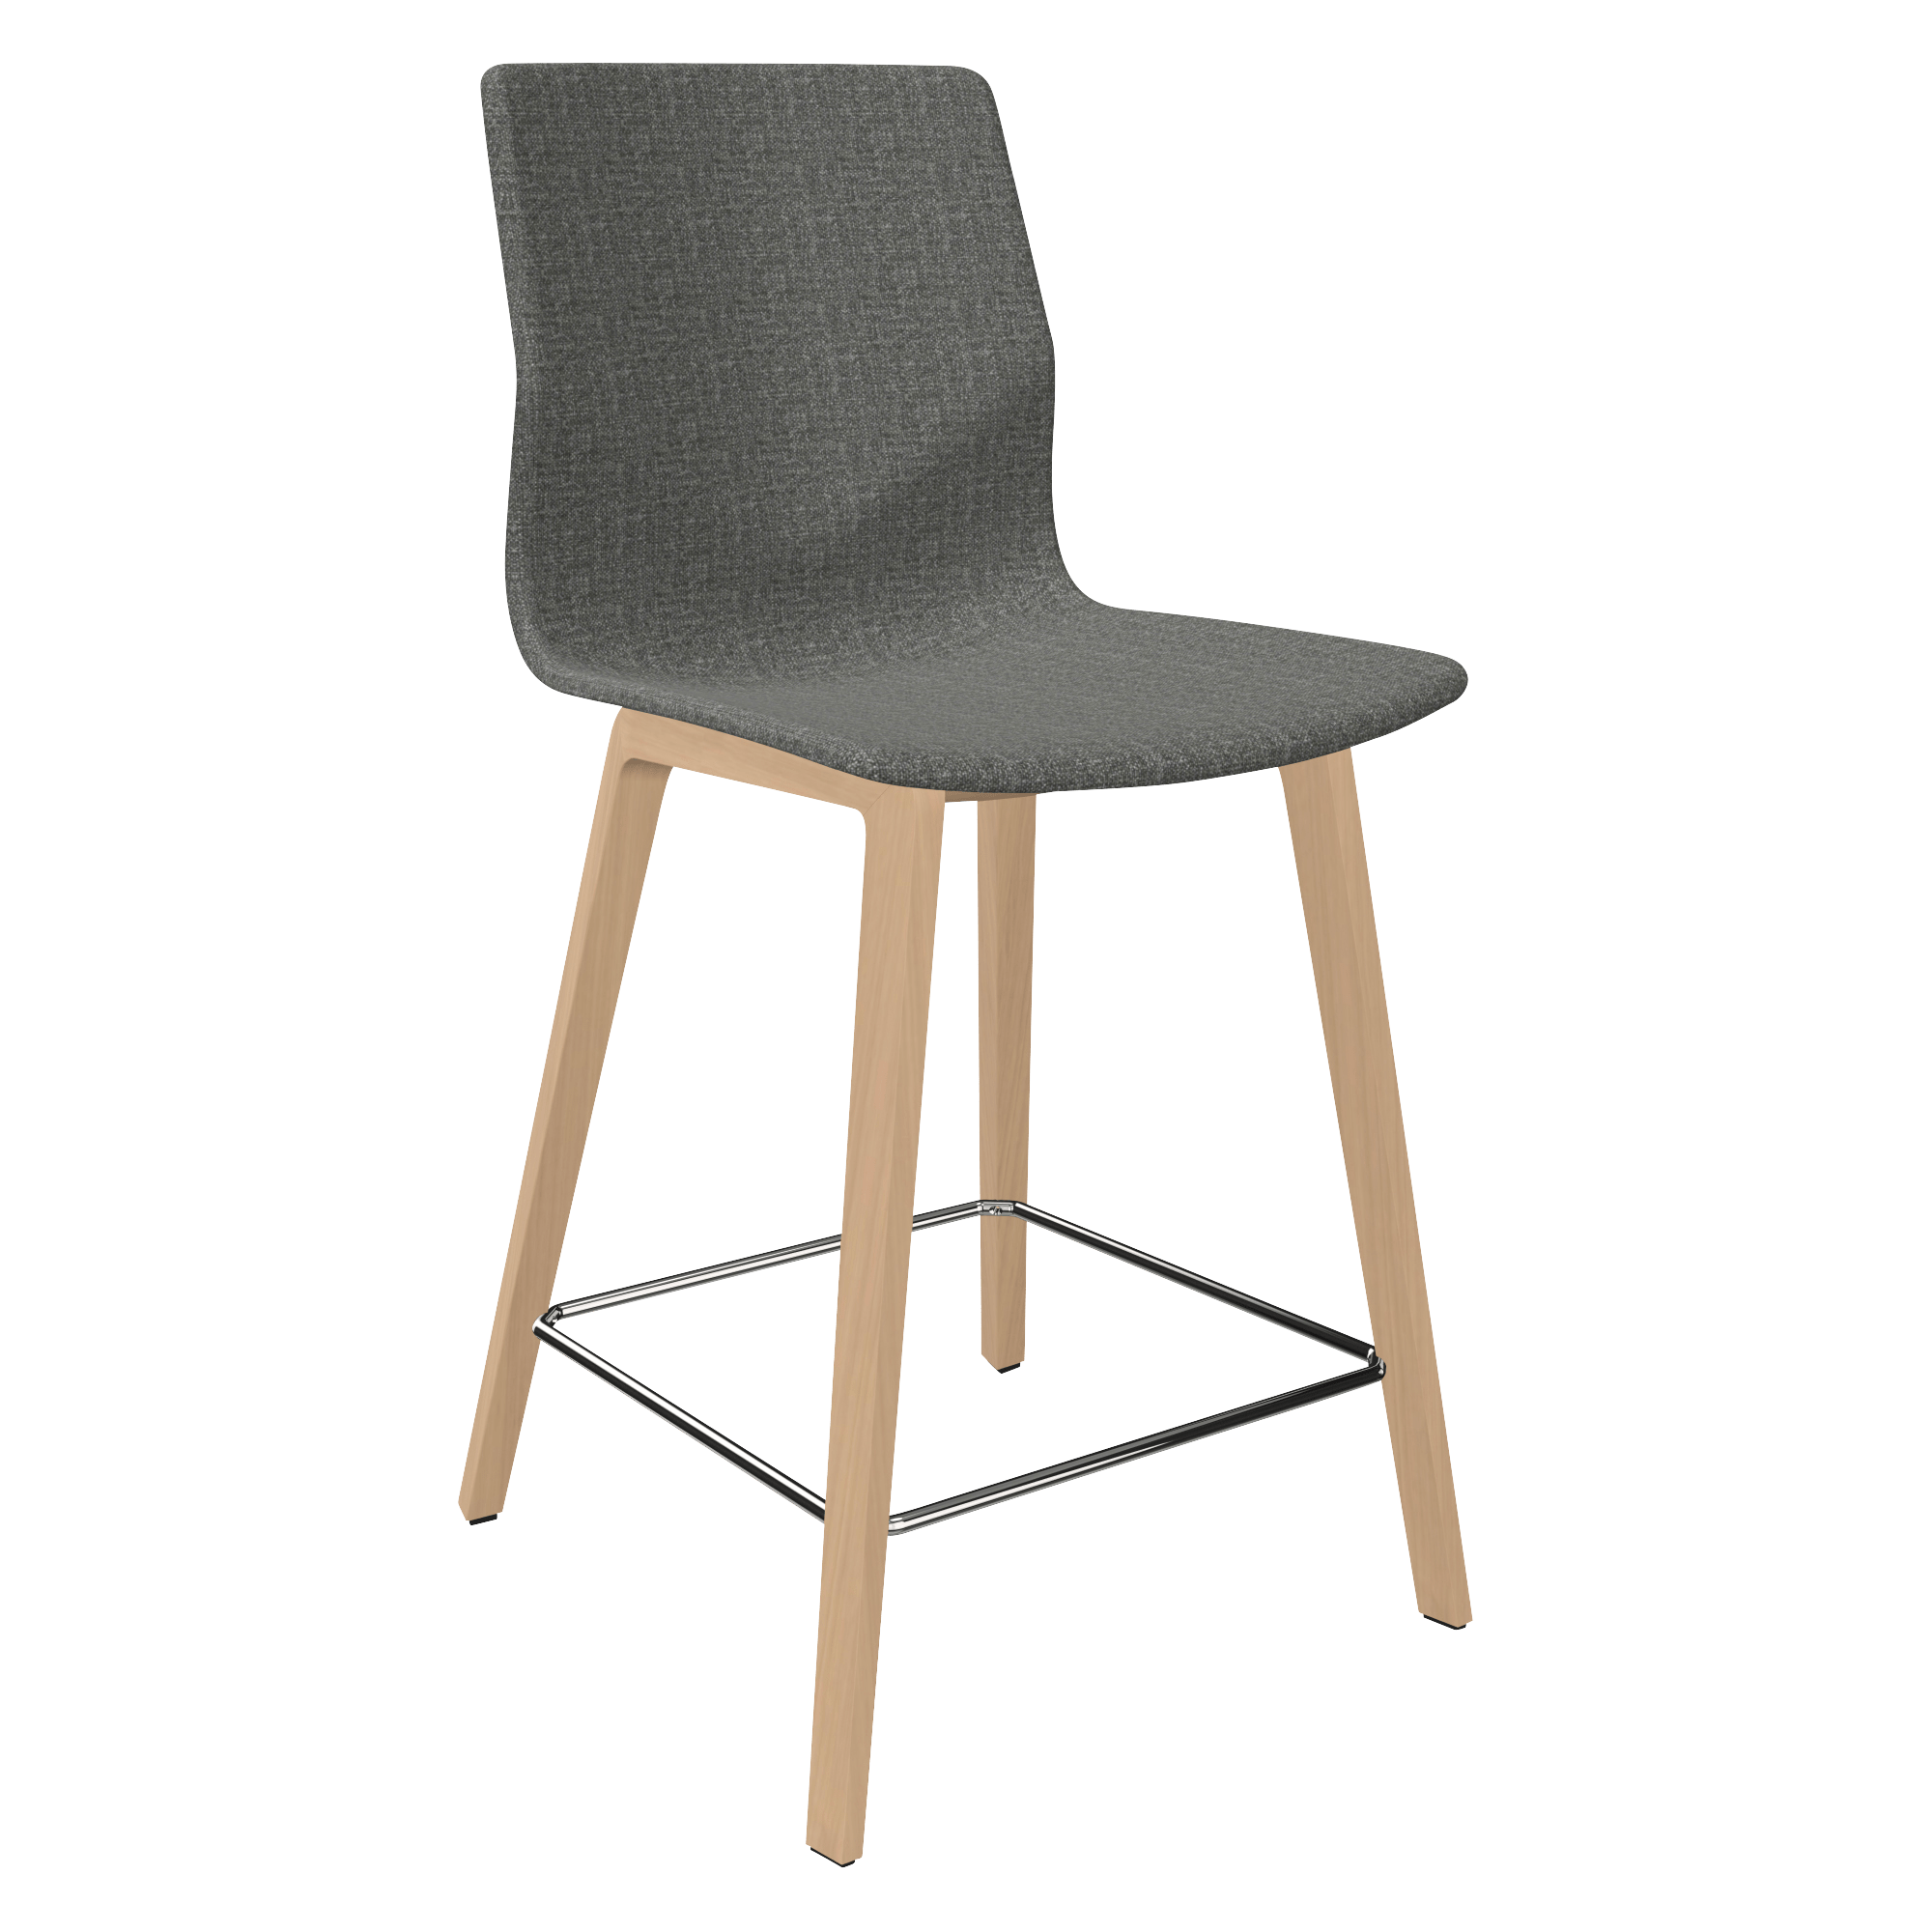 A grey mid height counter chair with 4 wooden legs